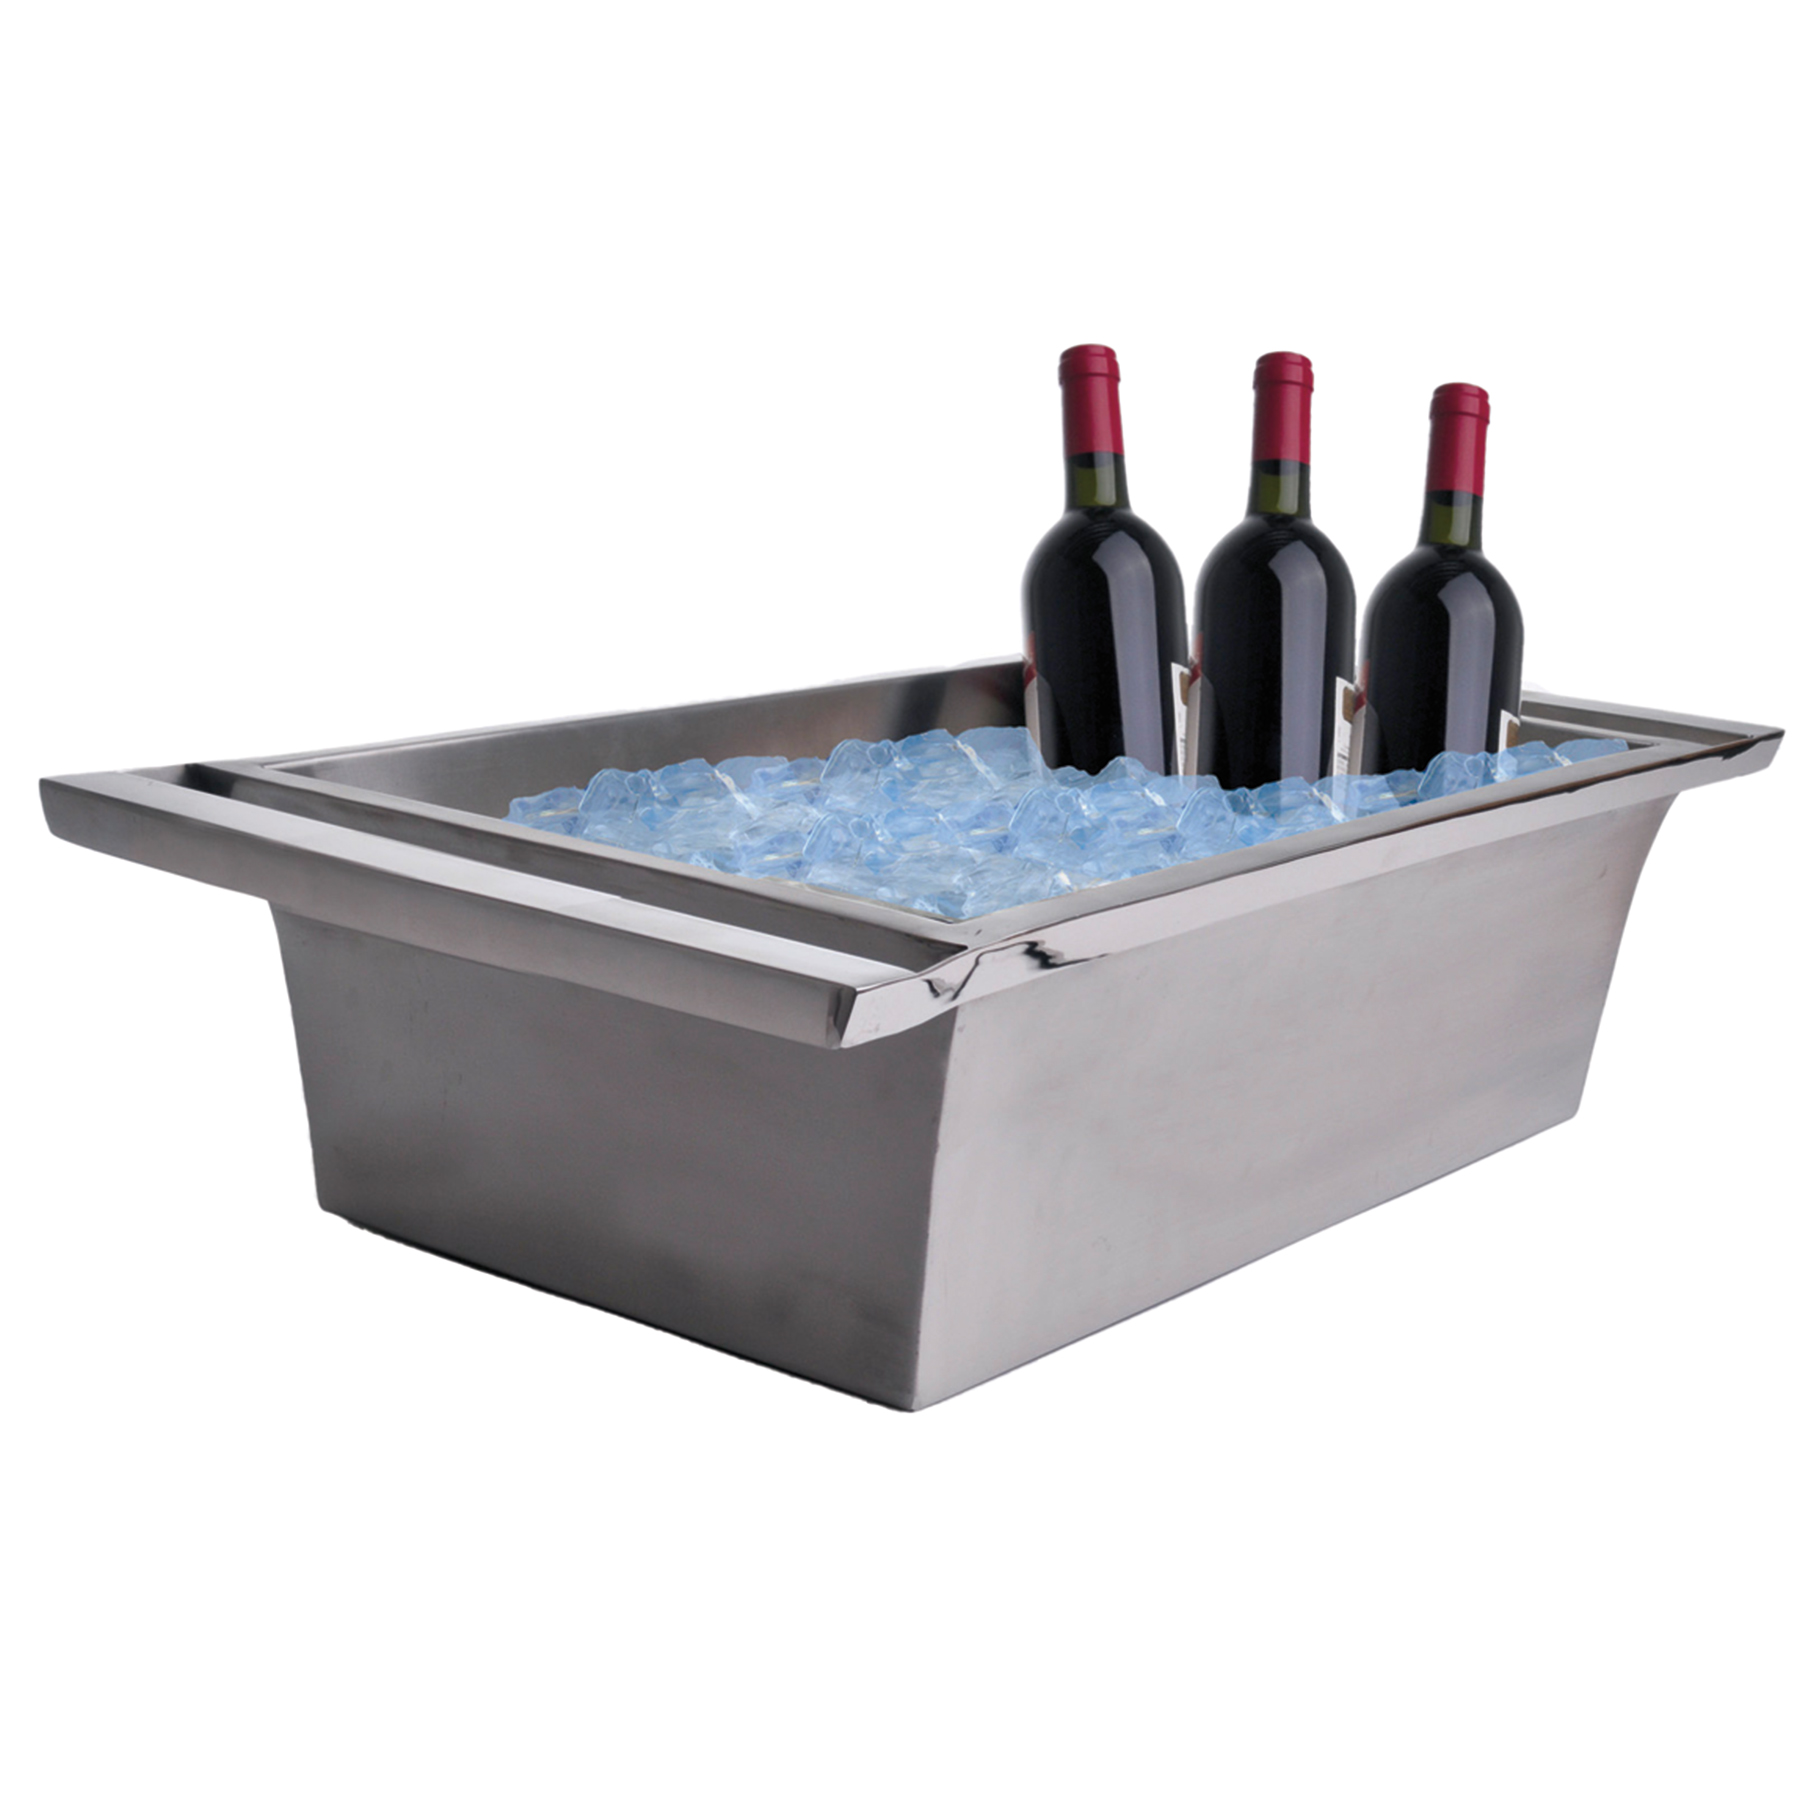 26.5" x 16" Double-Walled Stainless Steel Beverage Tub, 6.5" tall